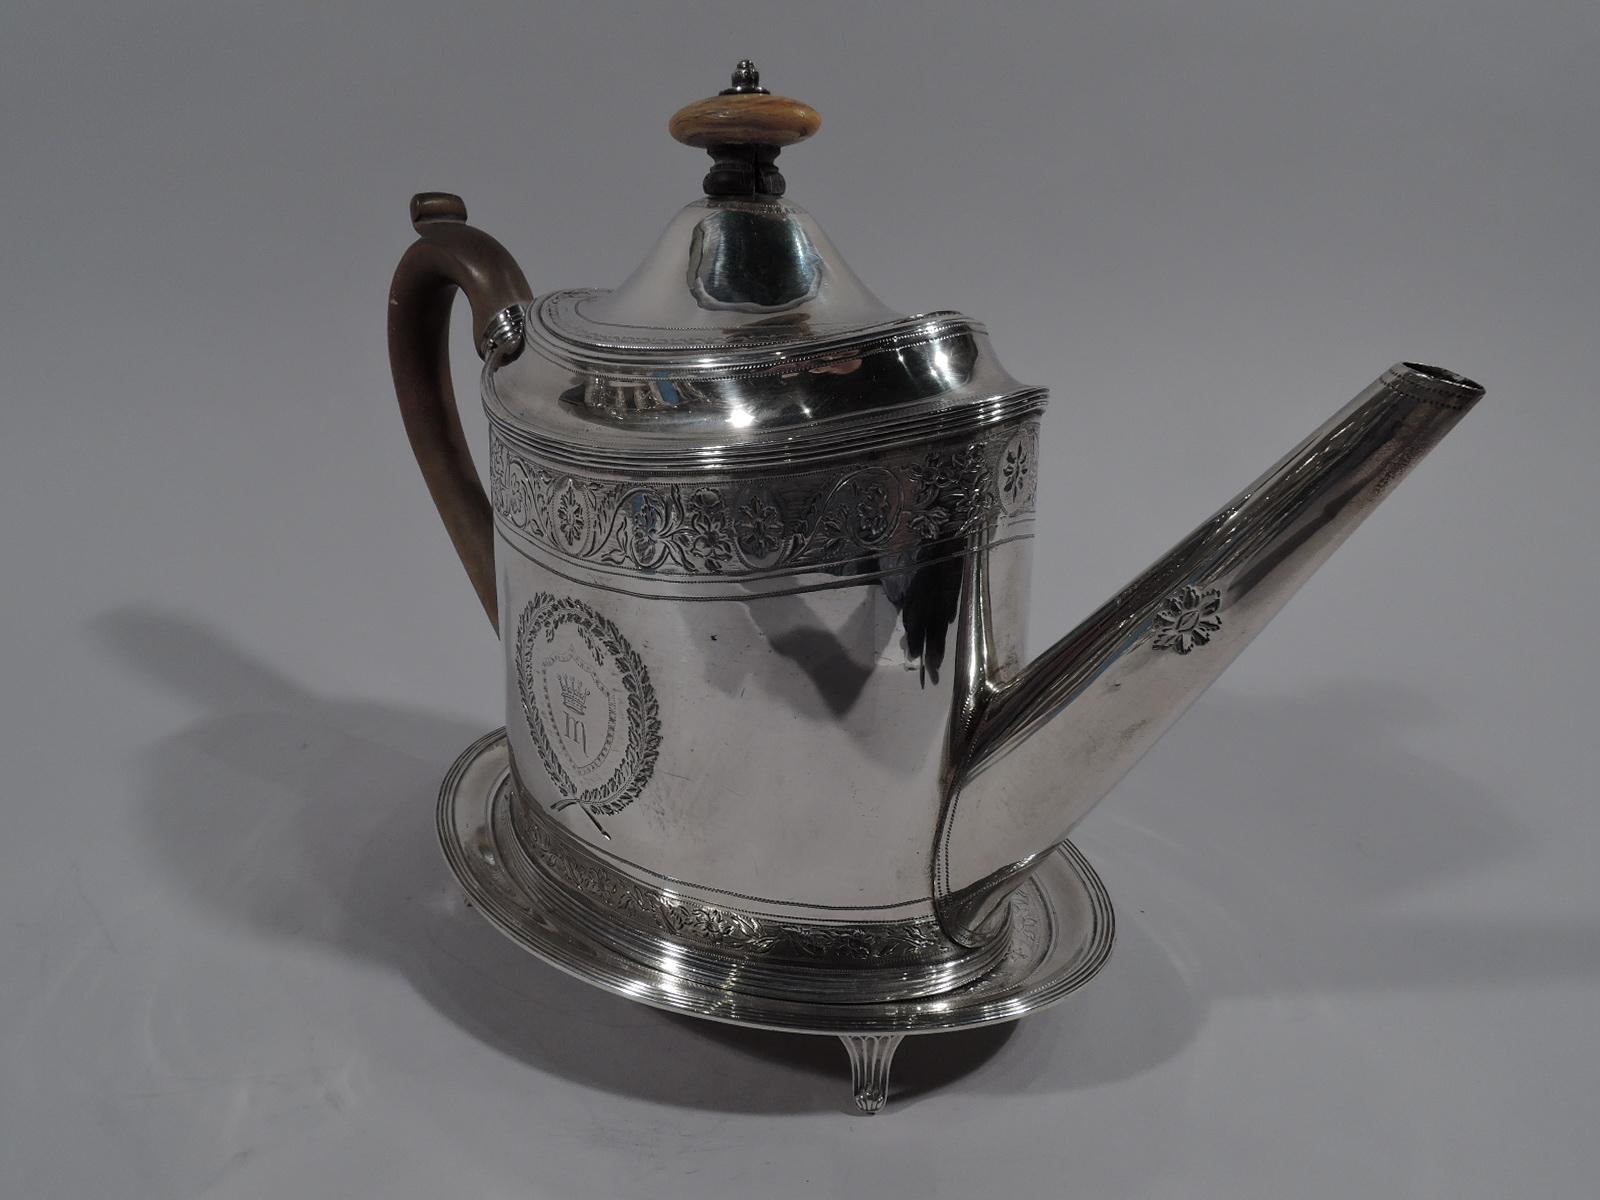 English Peter and Ann Bateman Neoclassical Sterling Silver Teapot on Stand